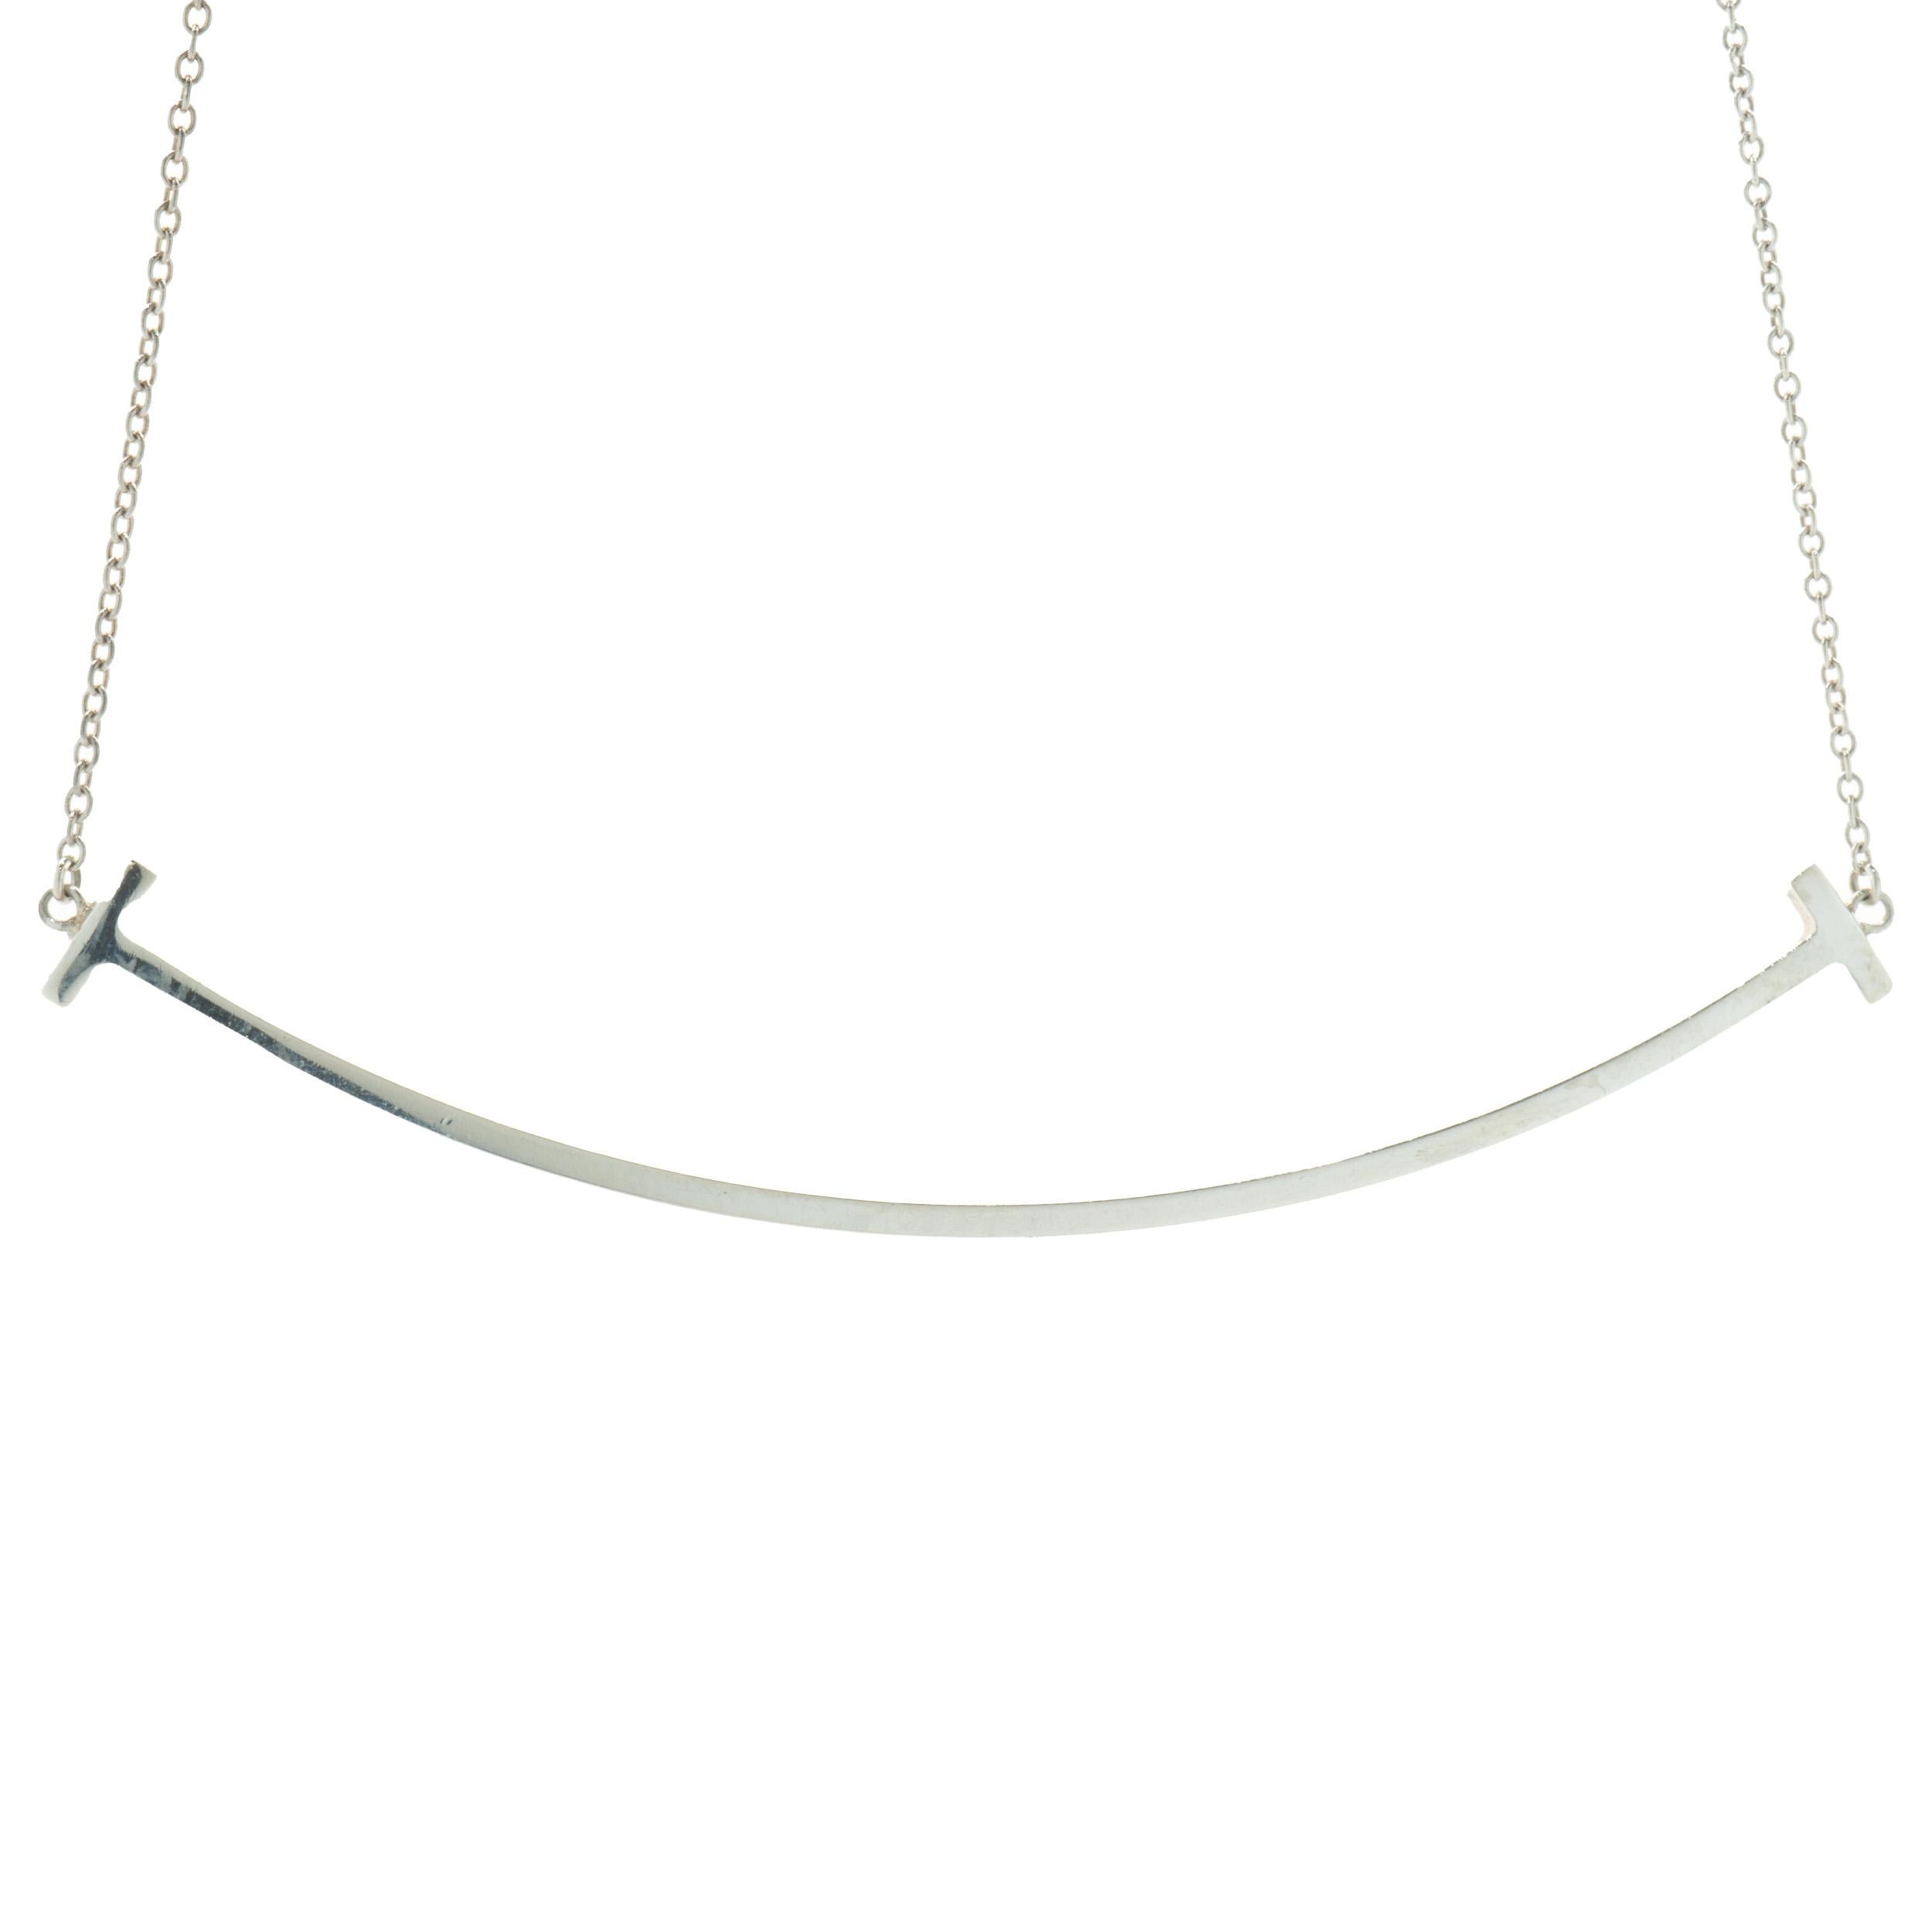 Designer: Tiffany & Co. 
Material: sterling silver
Dimensions: necklace measures 17-inches
Weight: 2.40 grams